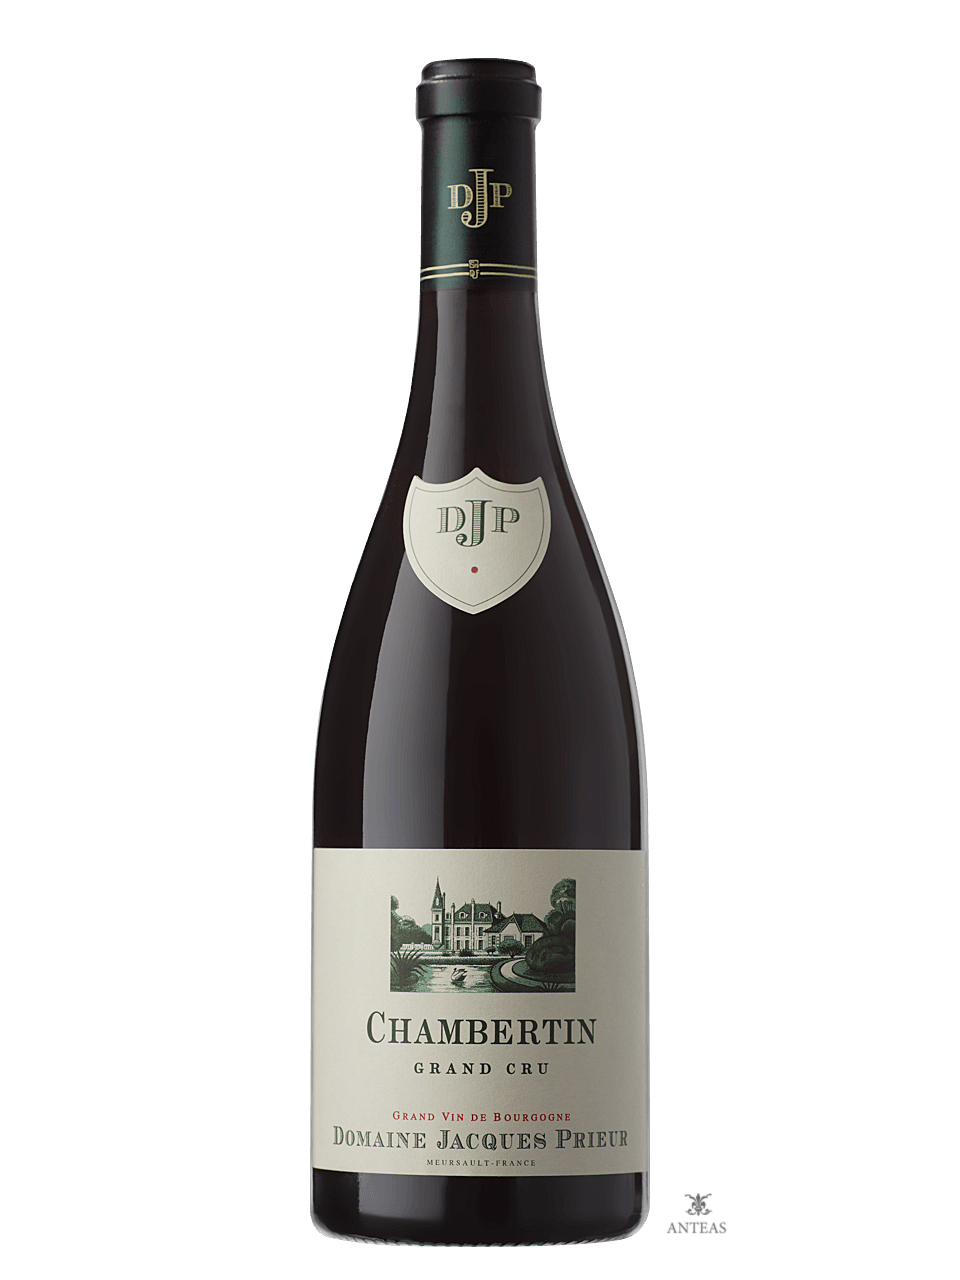 Domaine Jacques Prieur – Chambertin 2009